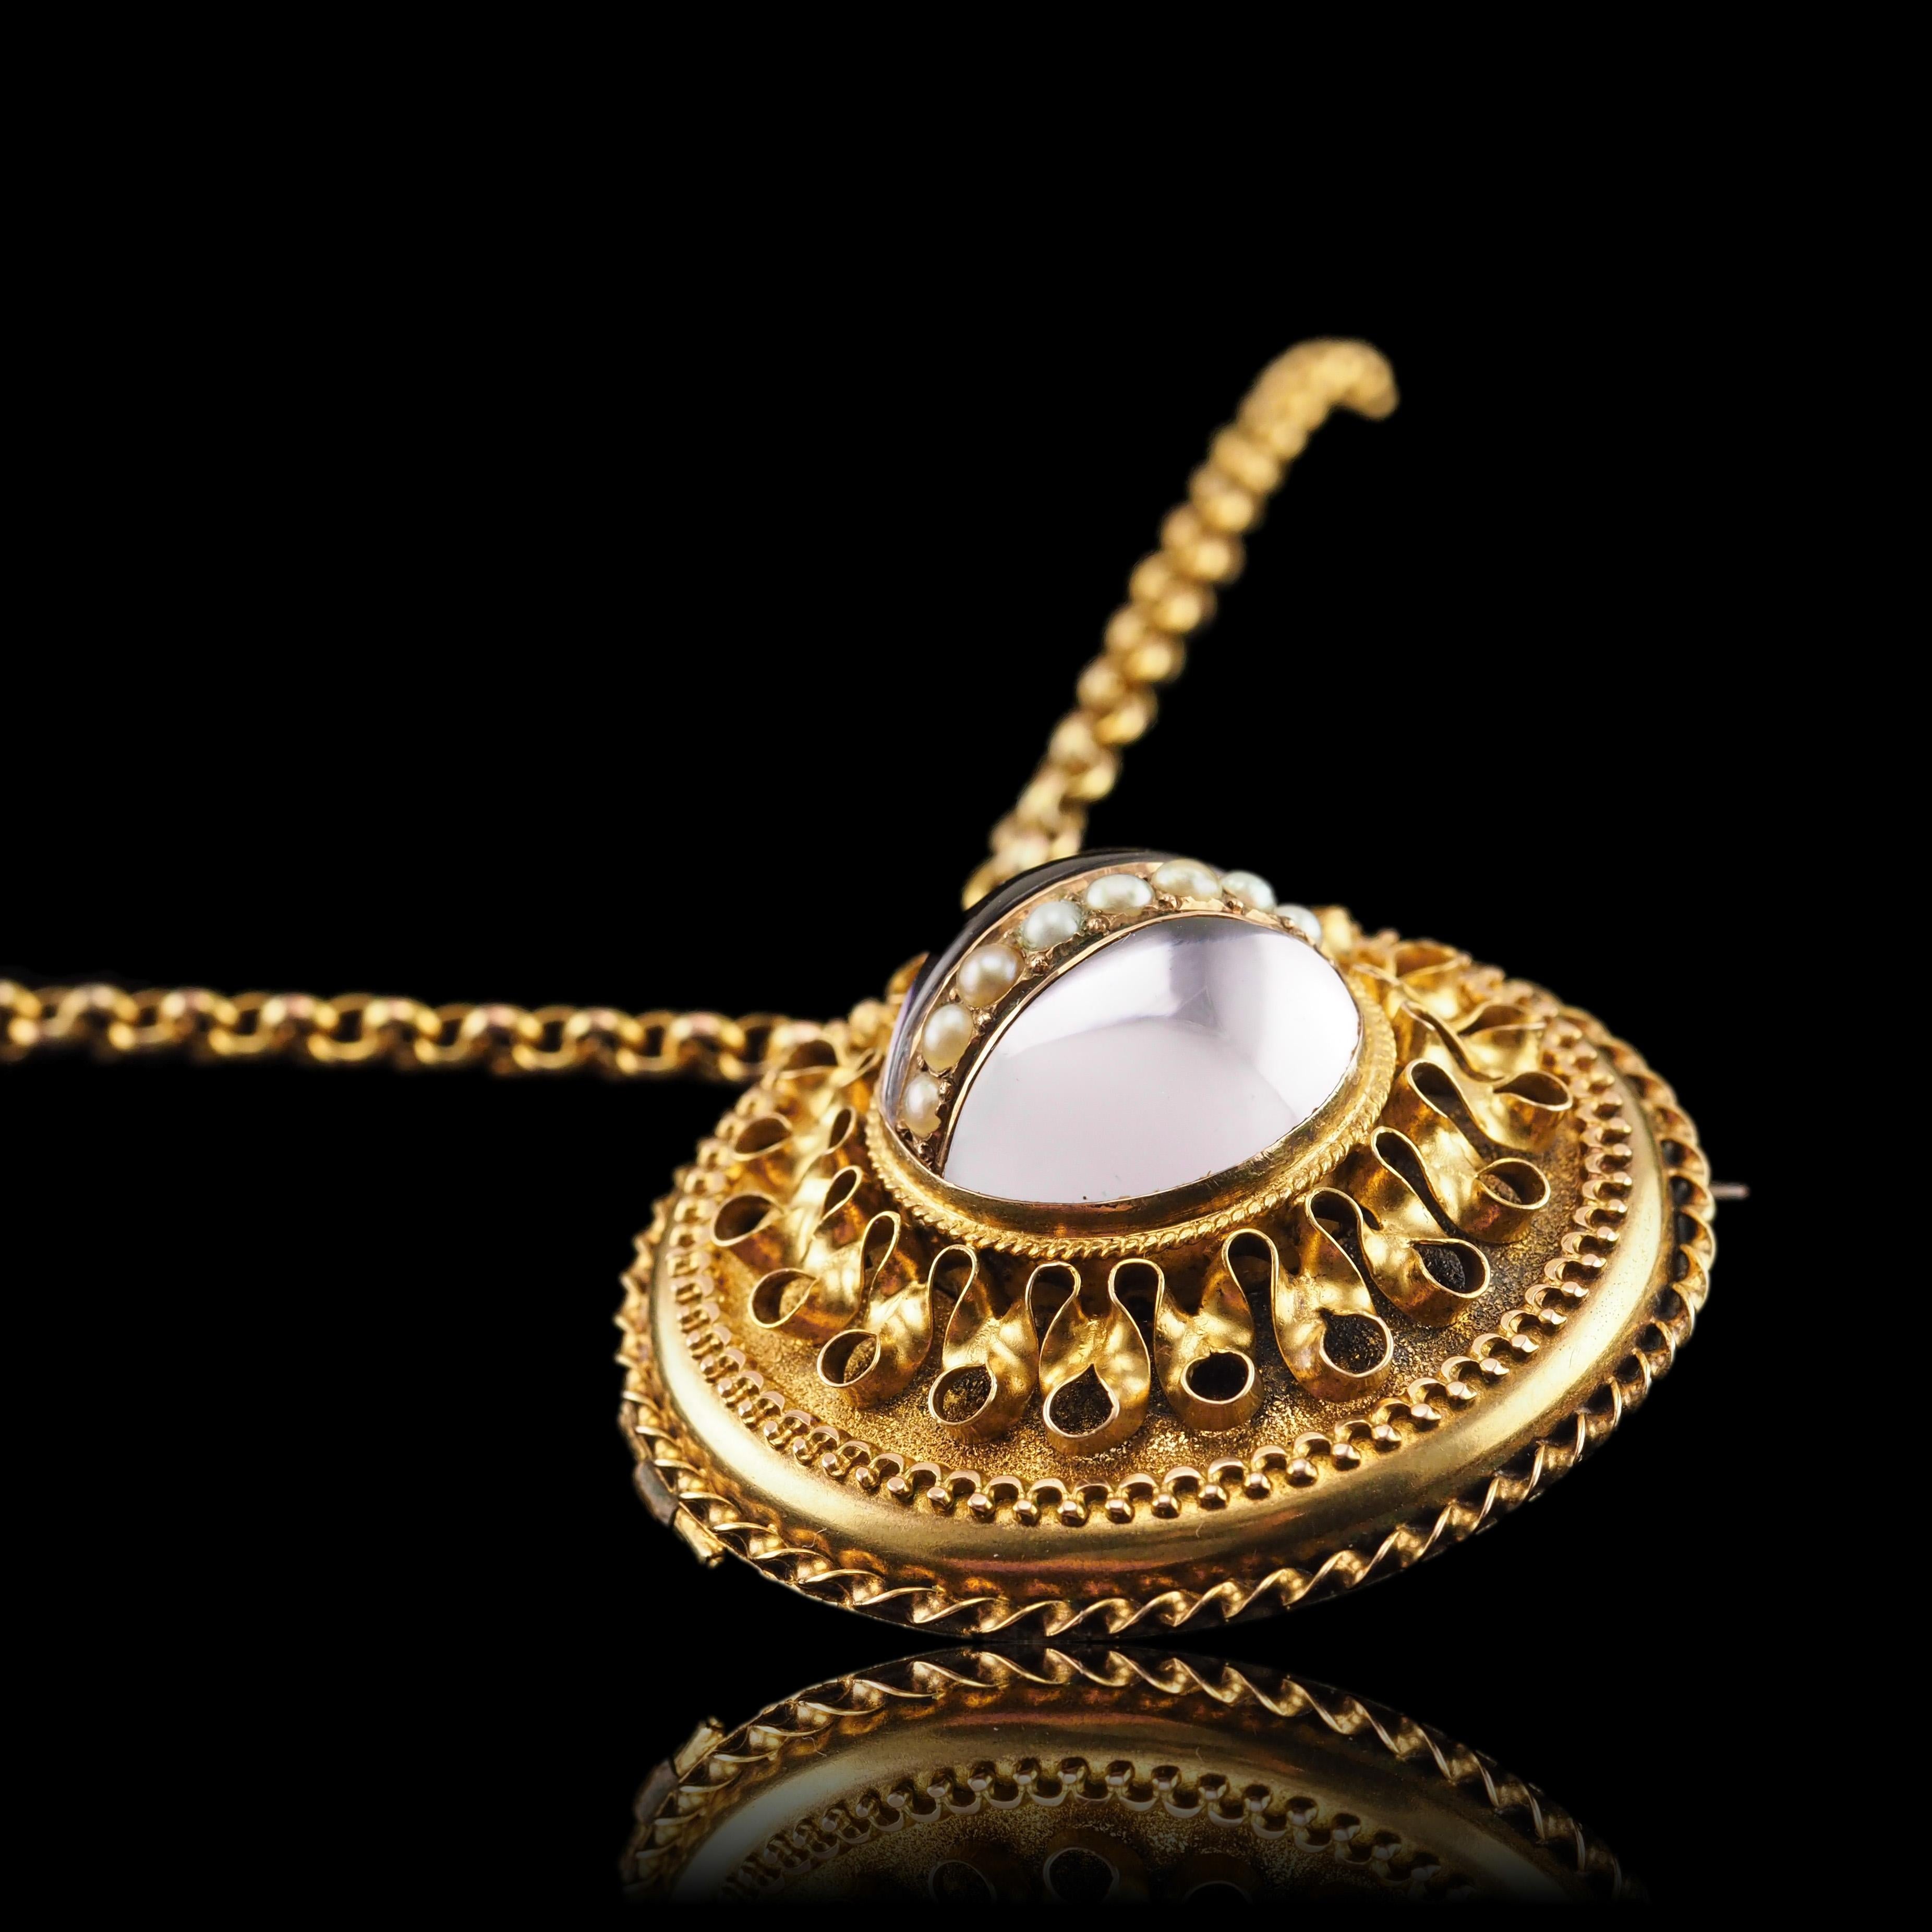 Antique Victorian Etruscan Style Necklace 15K Gold Rock Crystal Pendant c.1870 For Sale 7